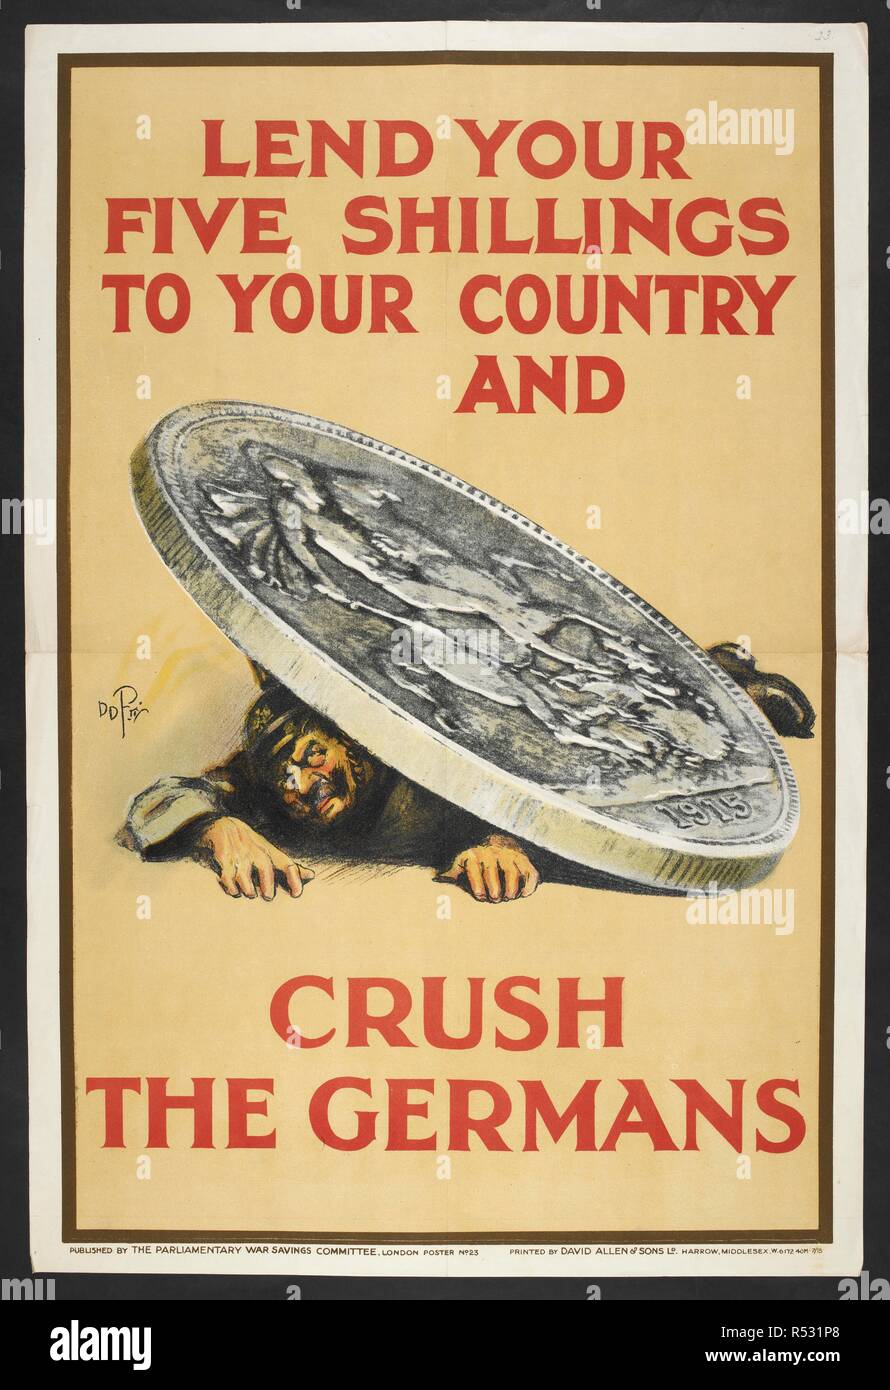 'Lend your five shillings to your country and crush the Germans'. A German soldier crushed by the weight of a British coin. [A collection of English and French War (World War I) Posters.]. 1914-1919. Source: Tab.11748.a. poster 23. Stock Photo